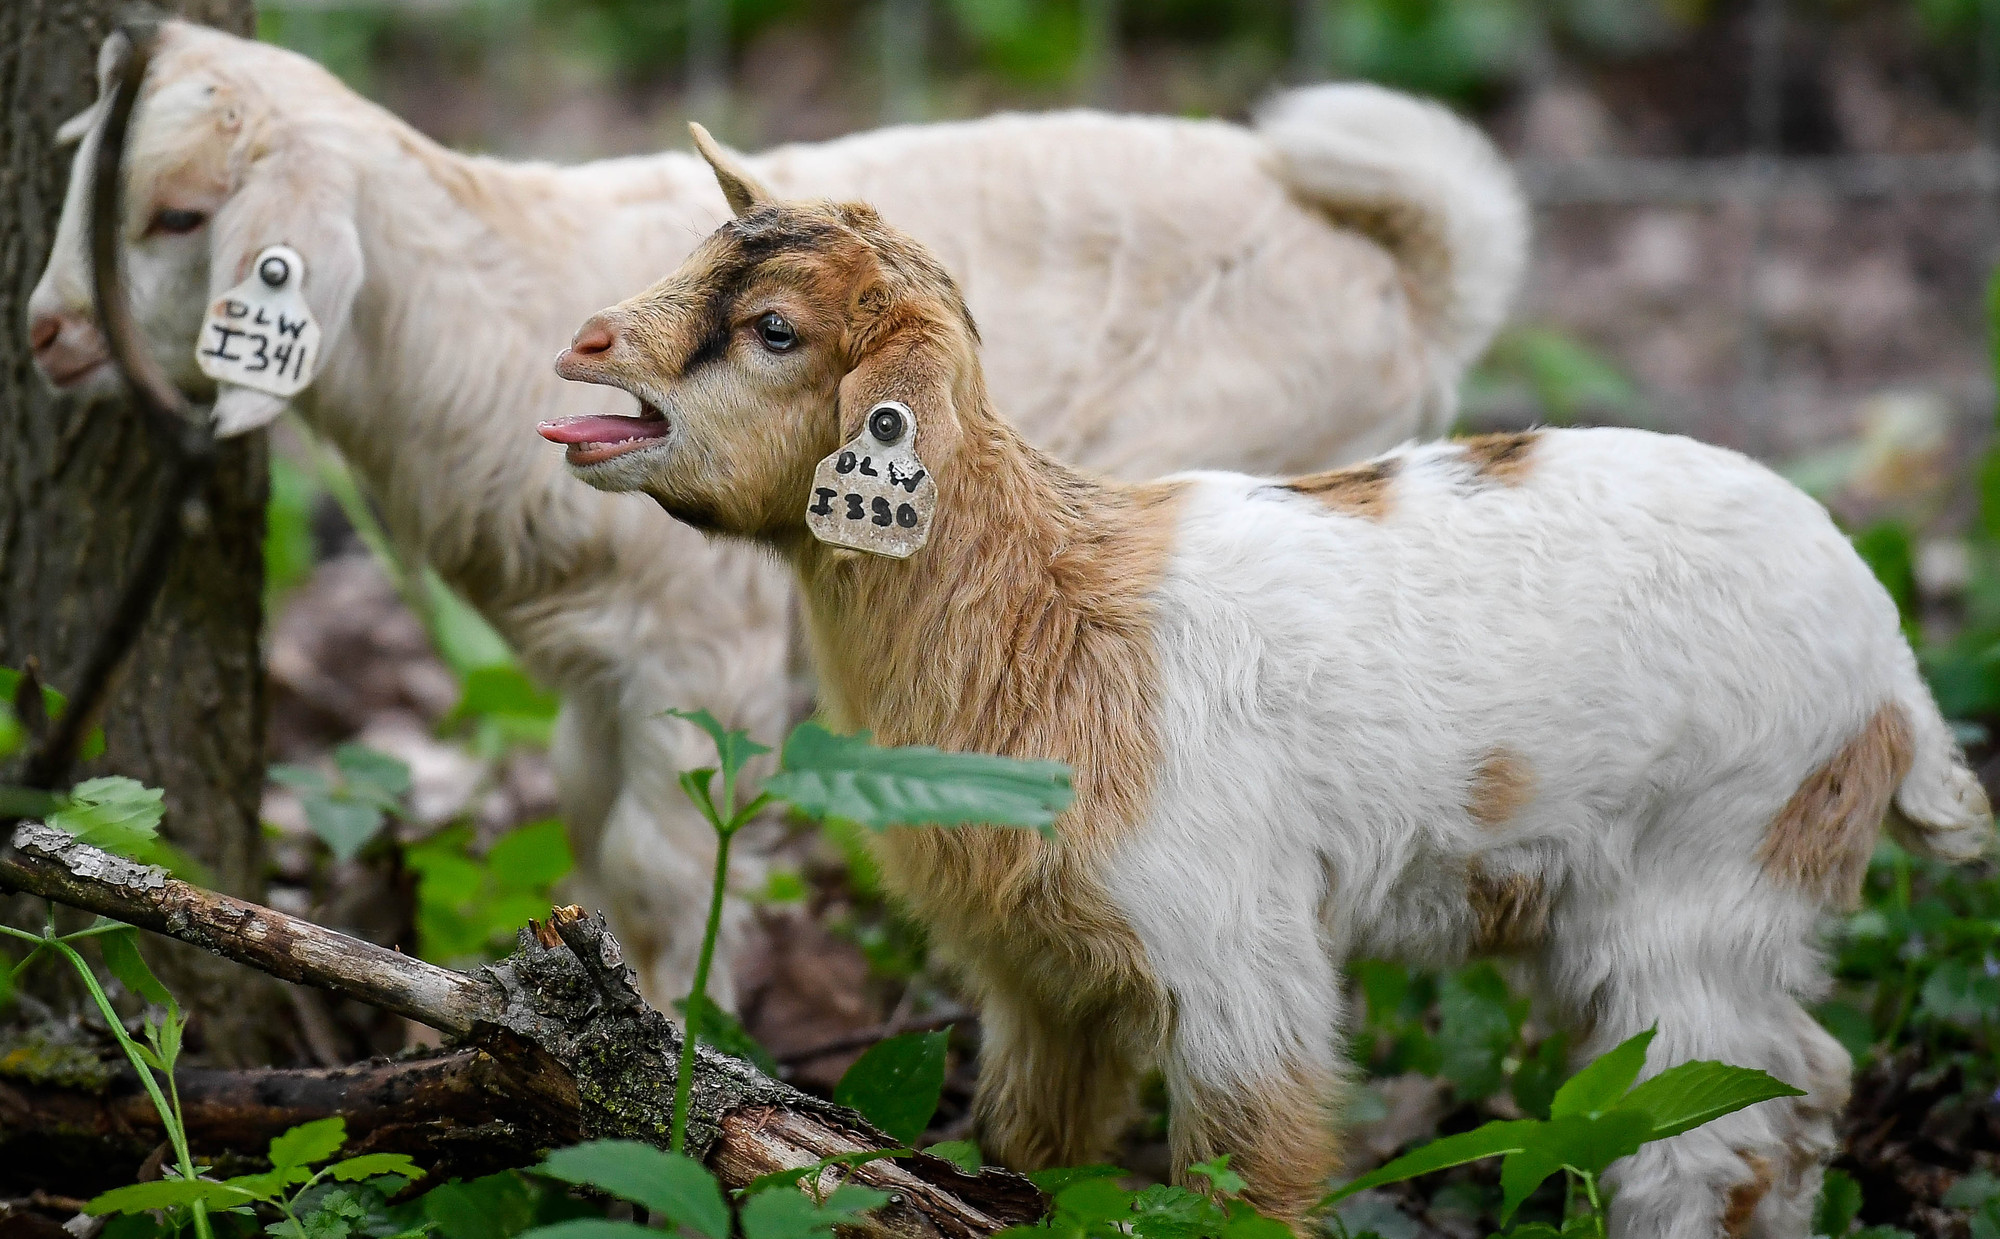 No kidding: Minneapolis City Council candidates queried about goats ...